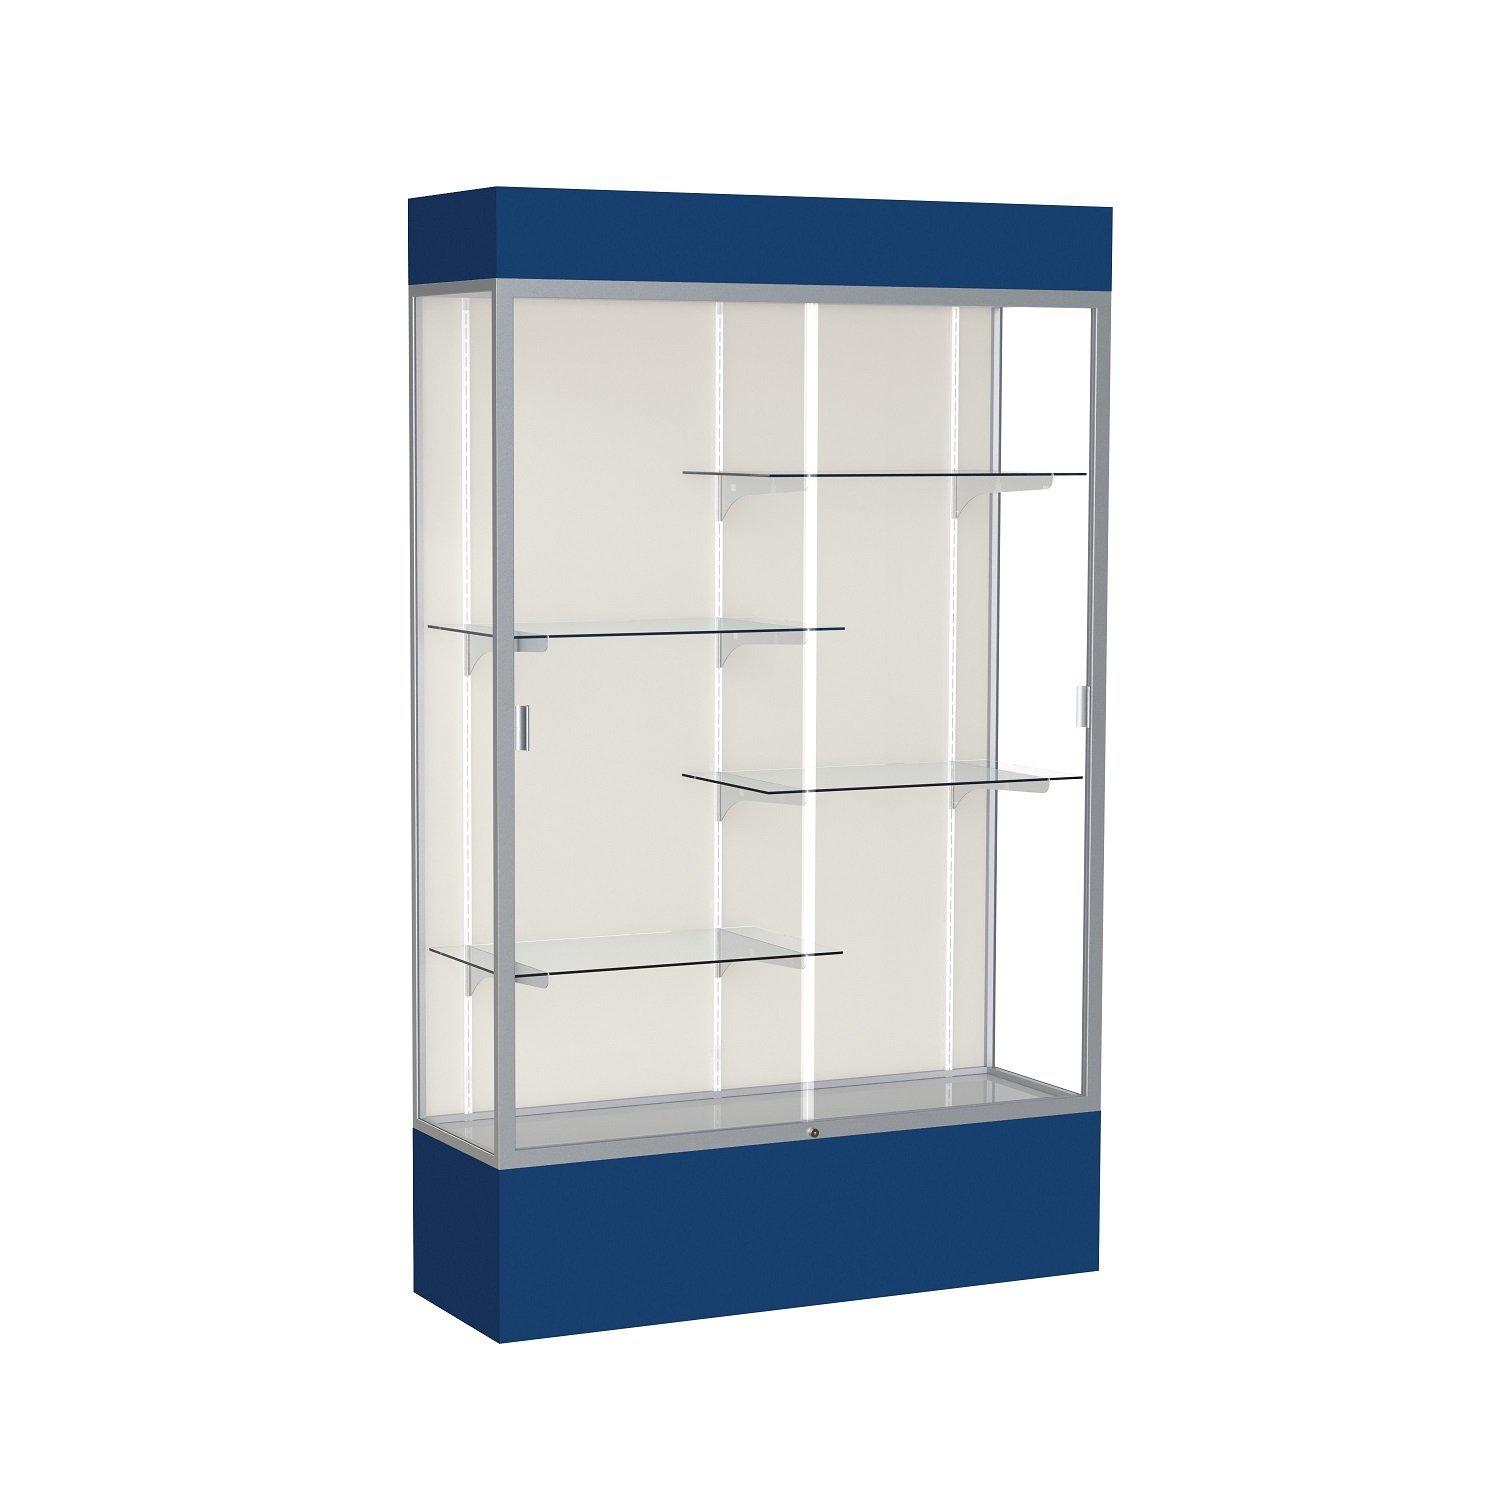 Waddell Keepsake Series Display Case (48'' L x 24'' D - Hinged top) -  3148HT, Retail & Counter-Height Display Cases